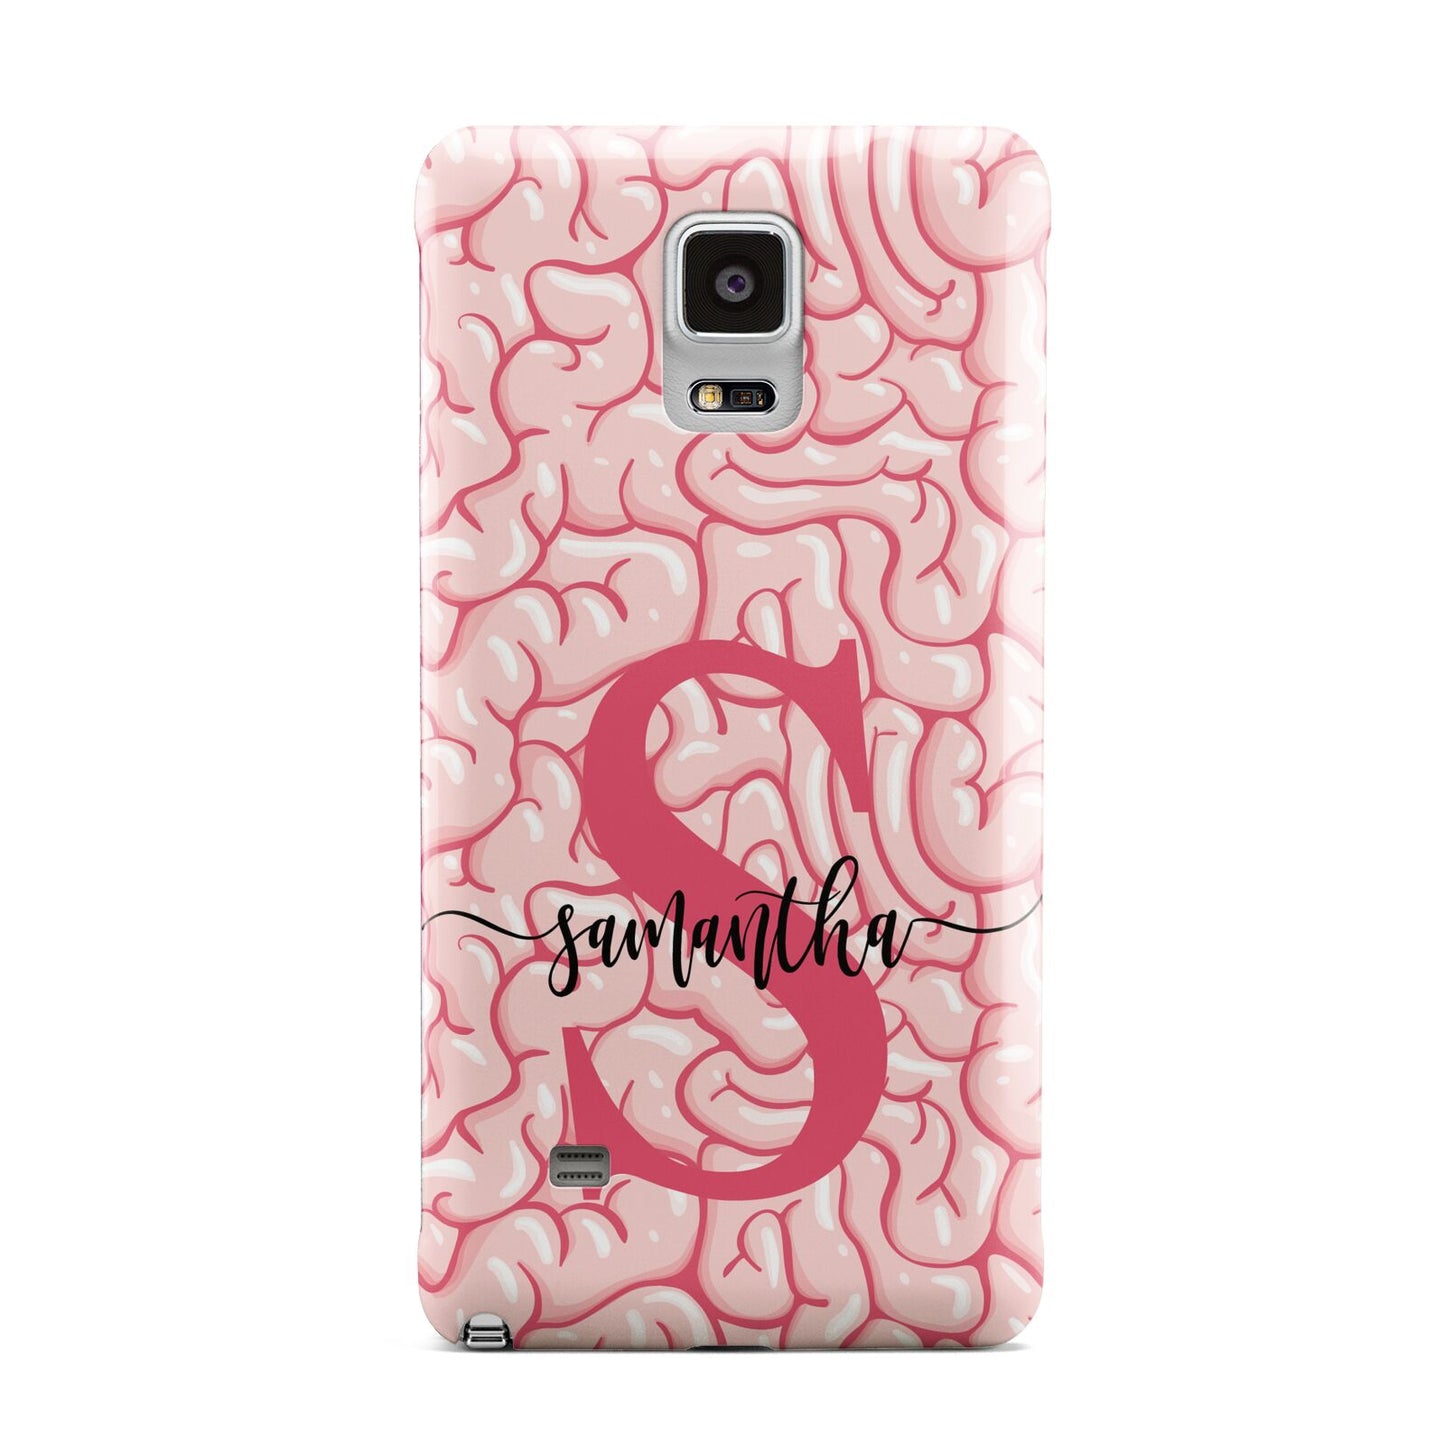 Brain Background with Monogram and Text Samsung Galaxy Note 4 Case